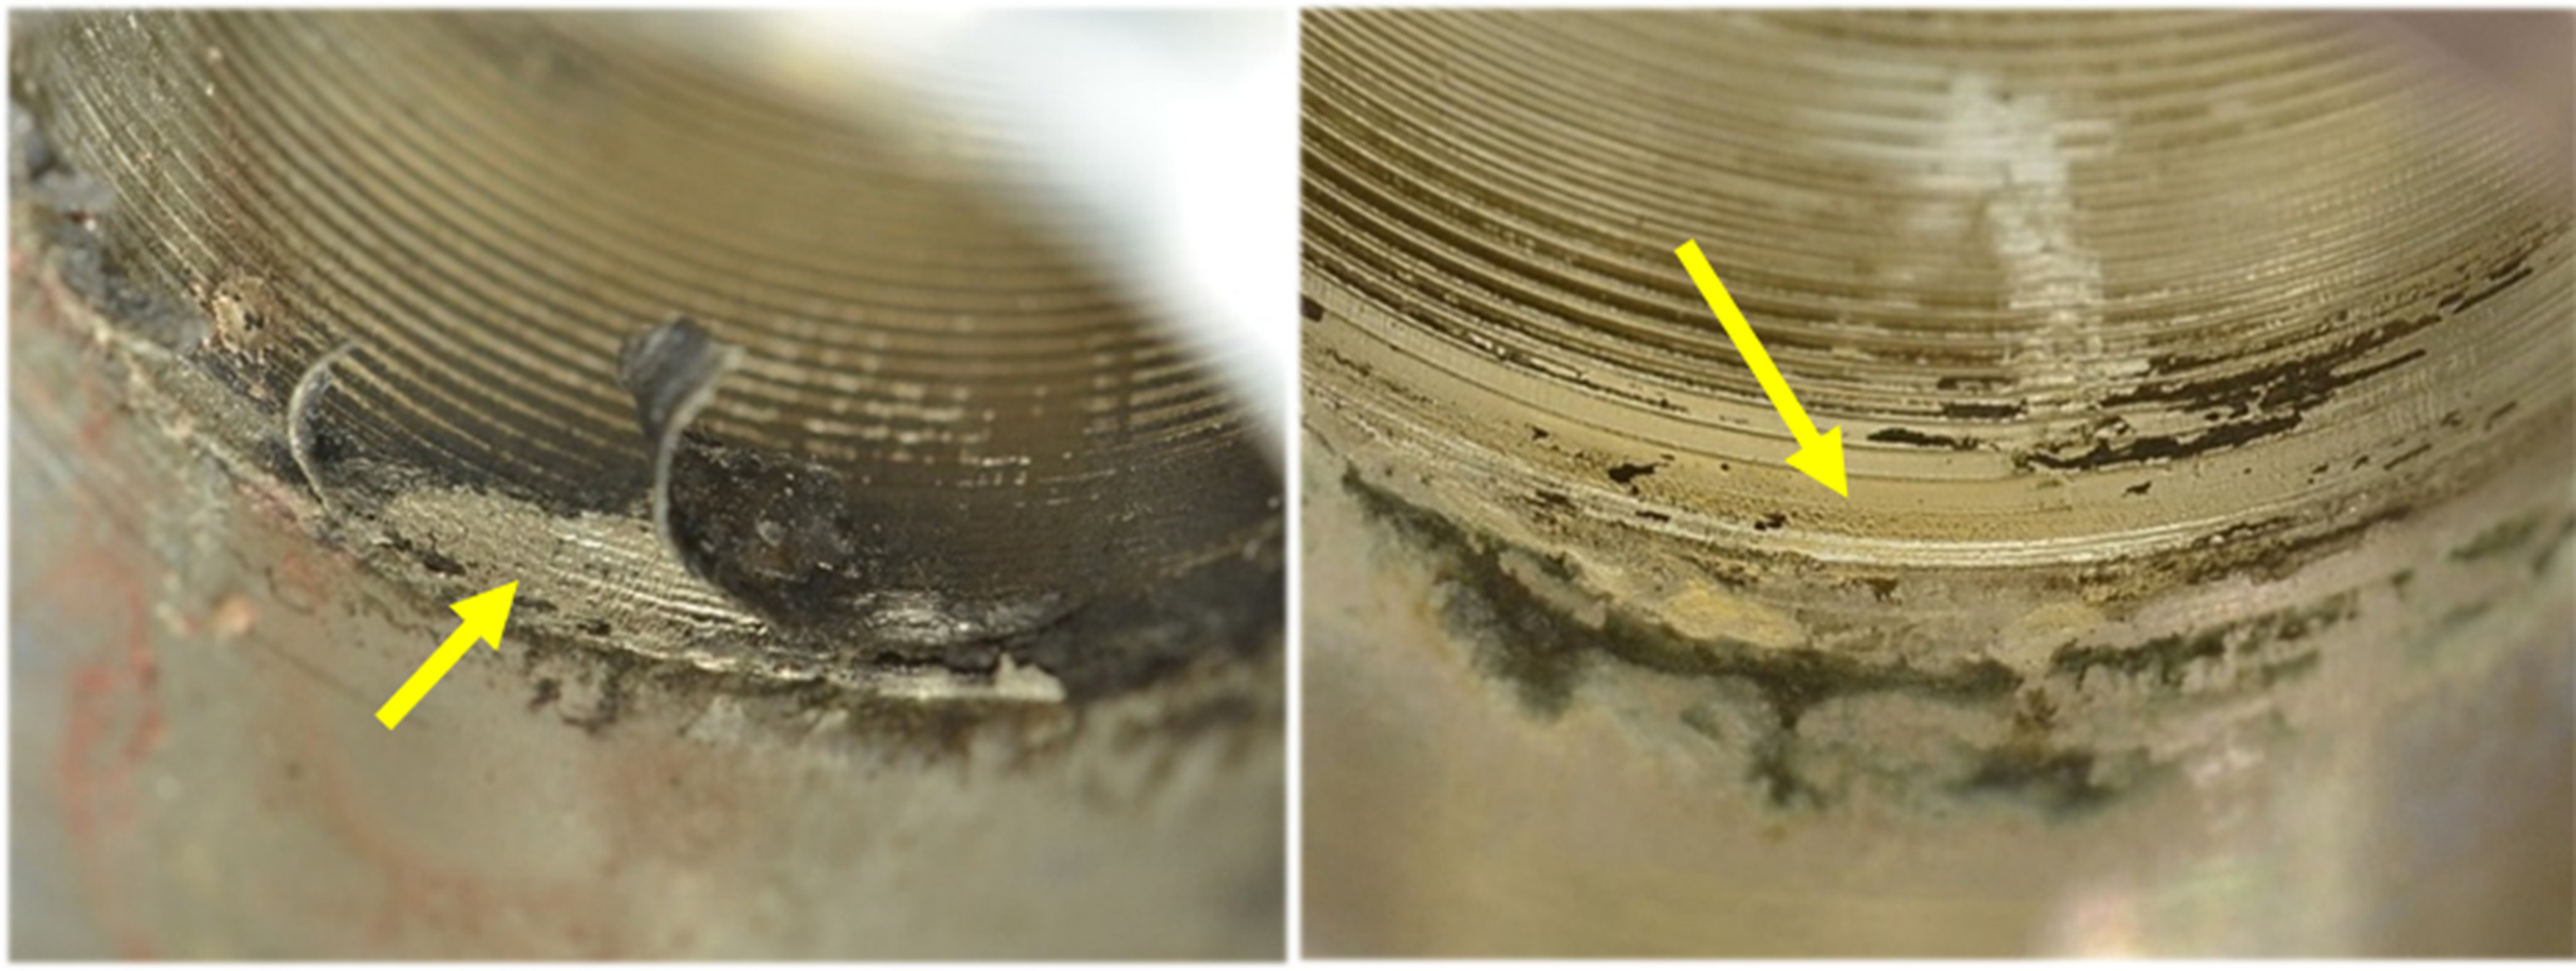 Fig. 1 
            Two examples of corrosive damage that would receive a grade of 4 using the Goldberg score due to the presence of deposits, but are further distinguished as a 5 using the visual grading system score, due to the presence of significant localized material loss as indicated by the arrows (maximum opening at the distal taper sleeve is 14 mm.)
          